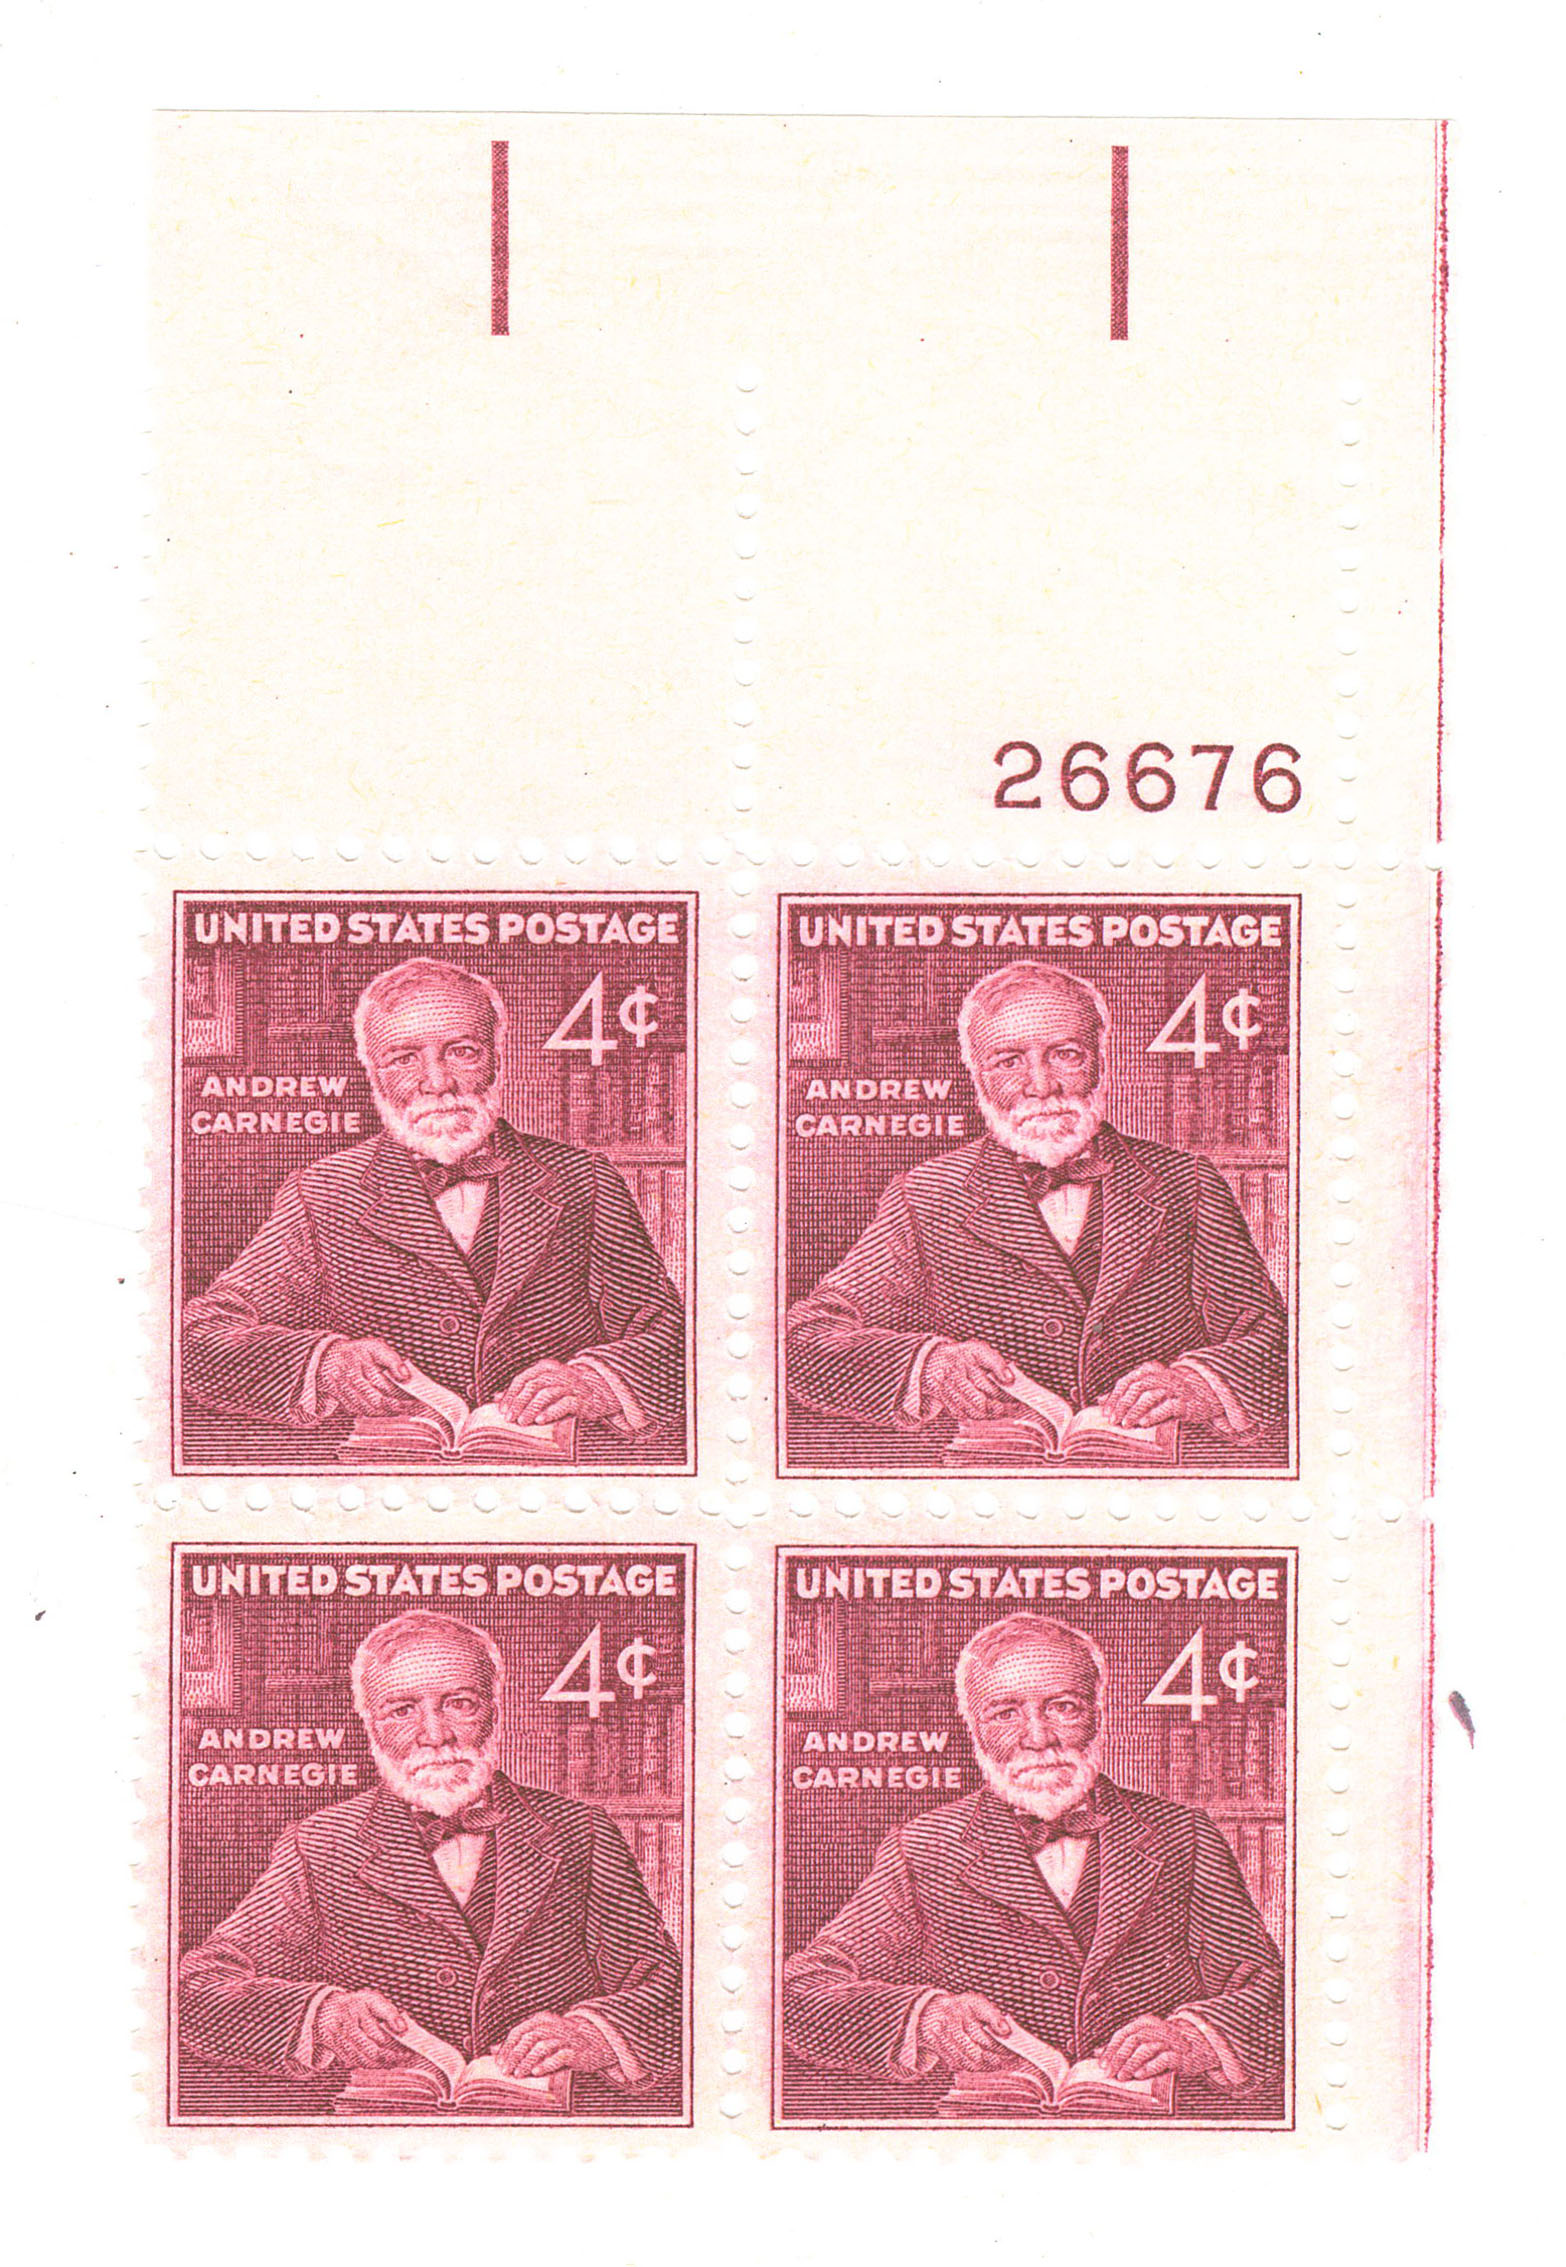 1960 Block of 4 cent Andrew Carnegie Stamps